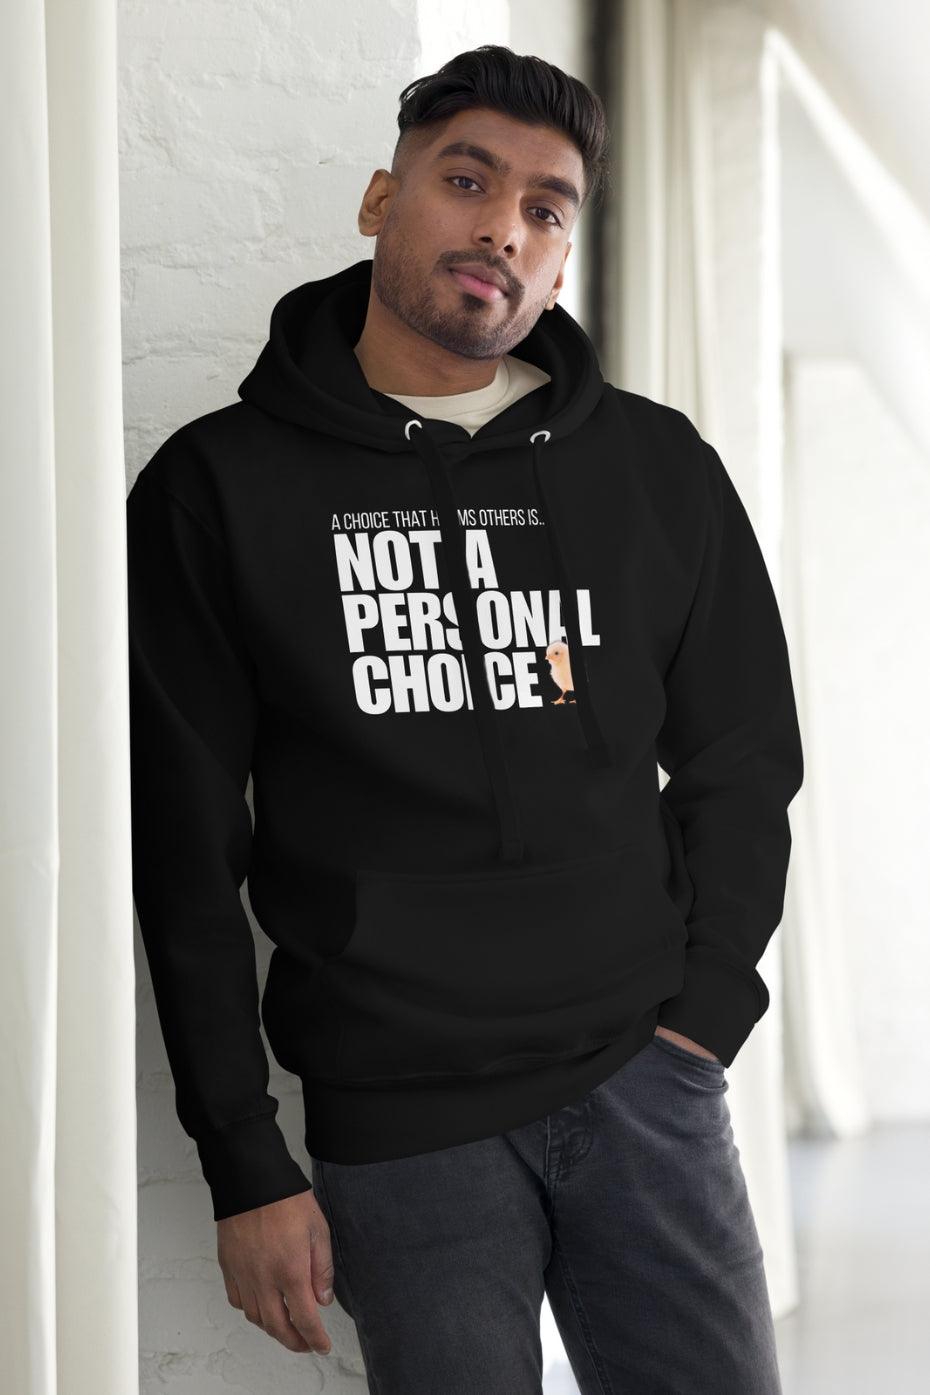 Not A Personal Choice Unisex Premium Hoodie